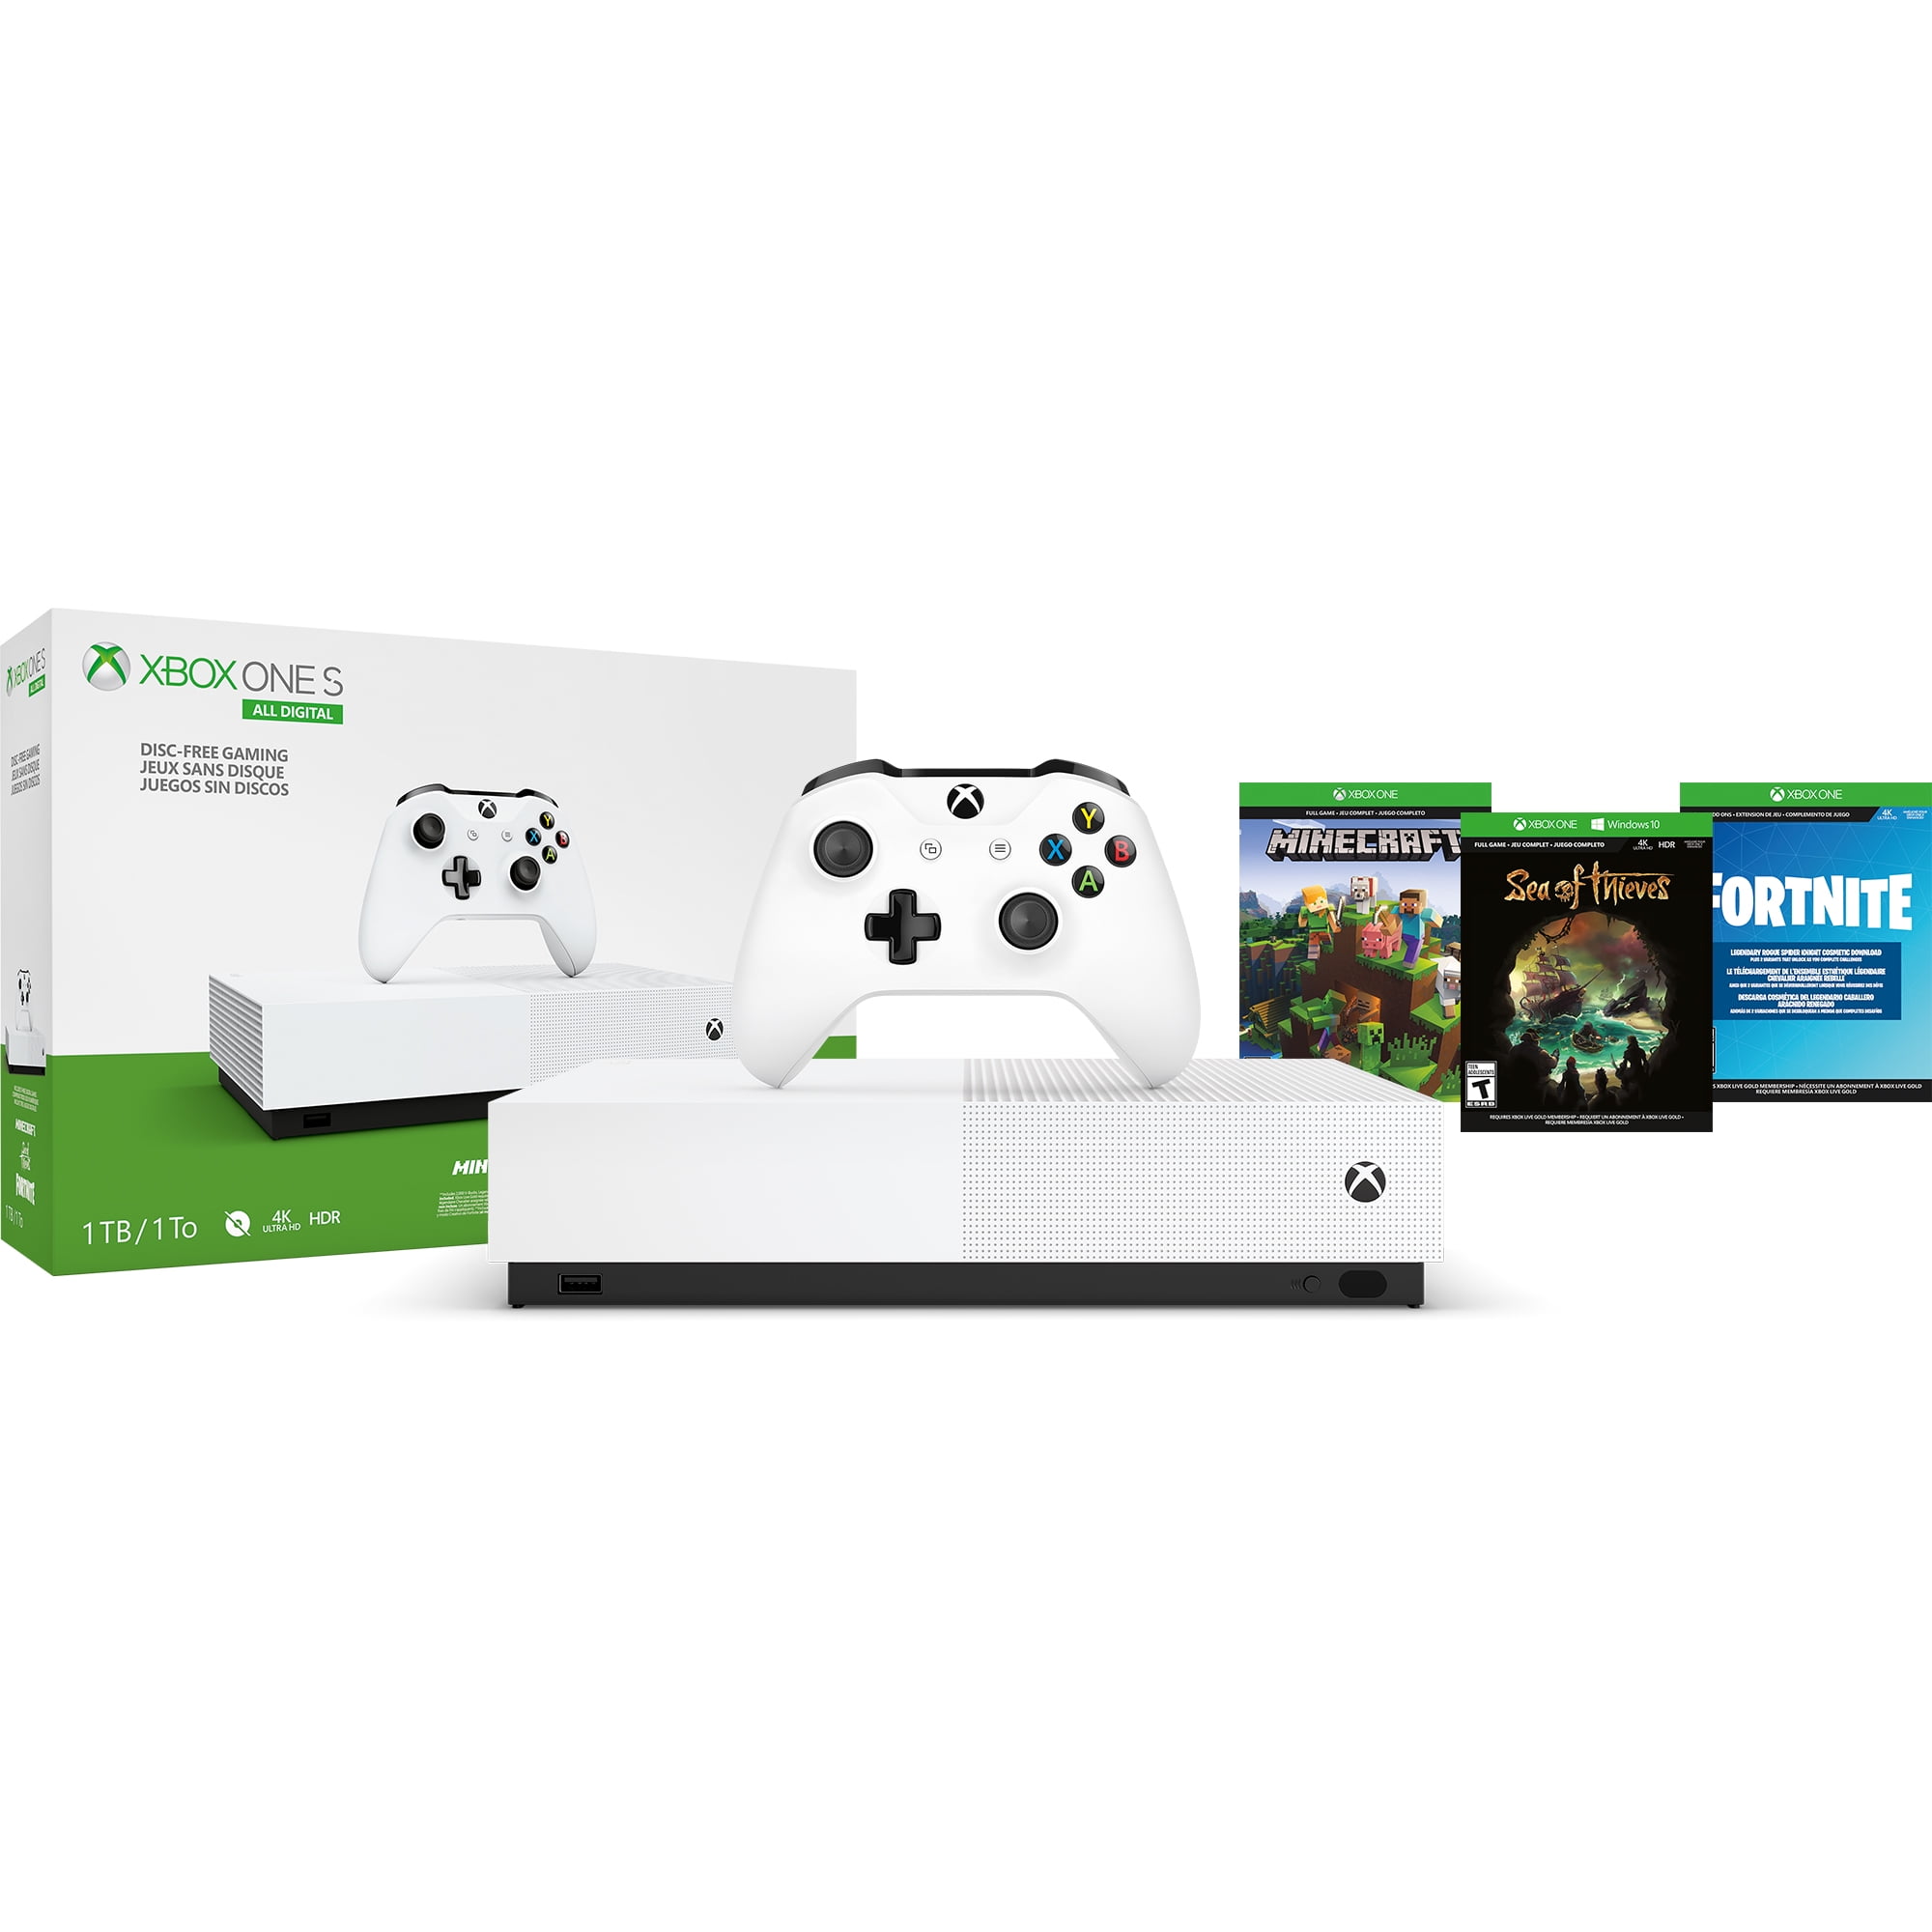 Xbox One S Roblox bundle now available with exclusive digital content